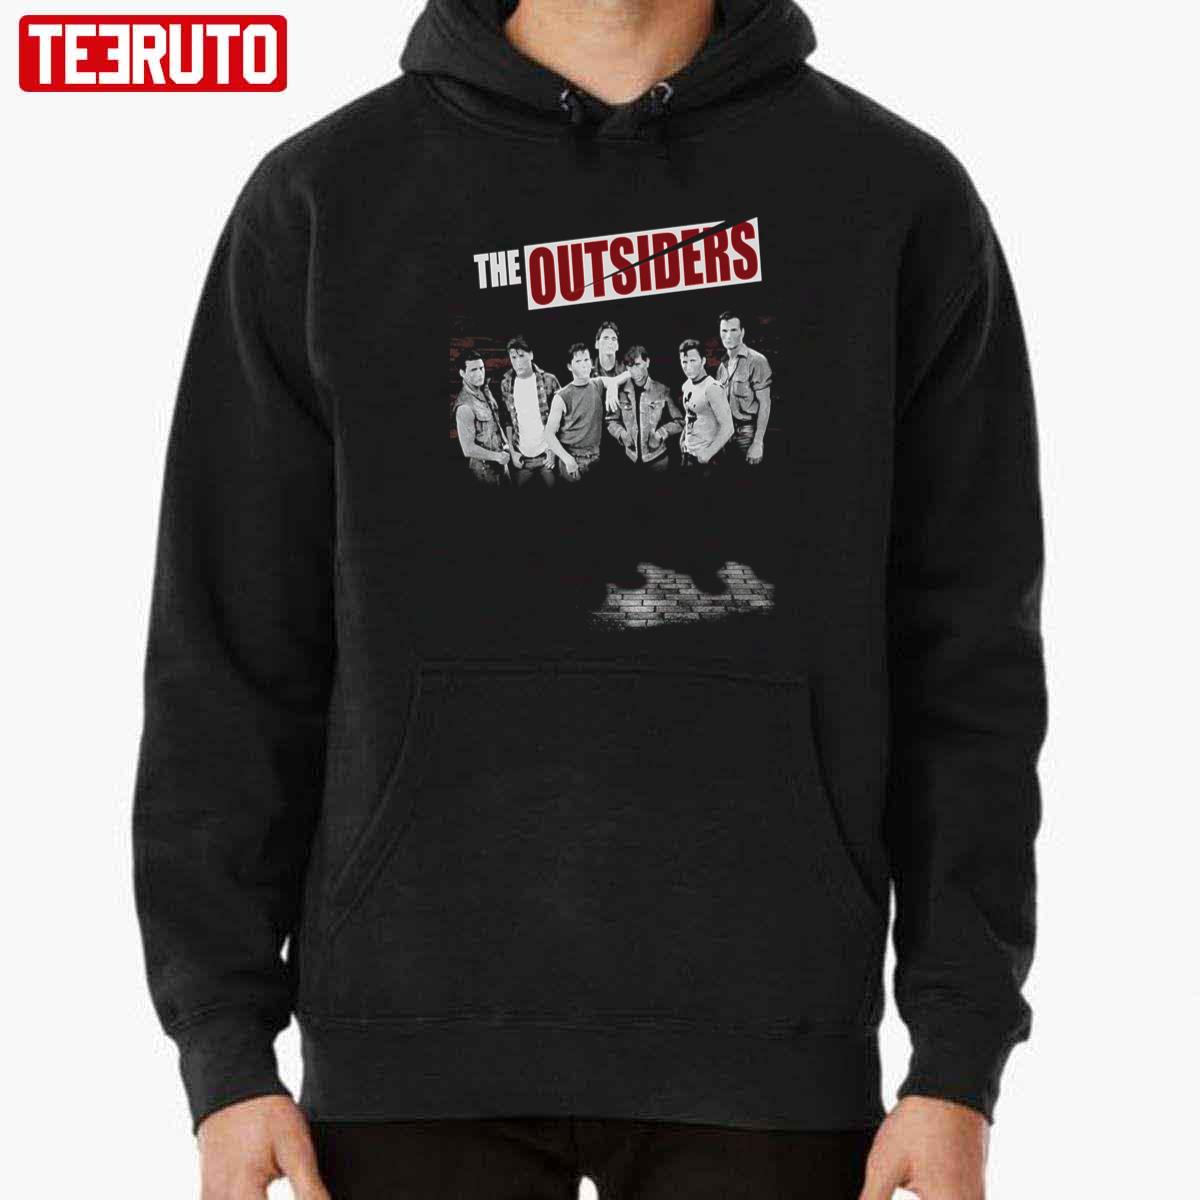 The Outsiders Band Graphic Unisex T-Shirt - Teeruto